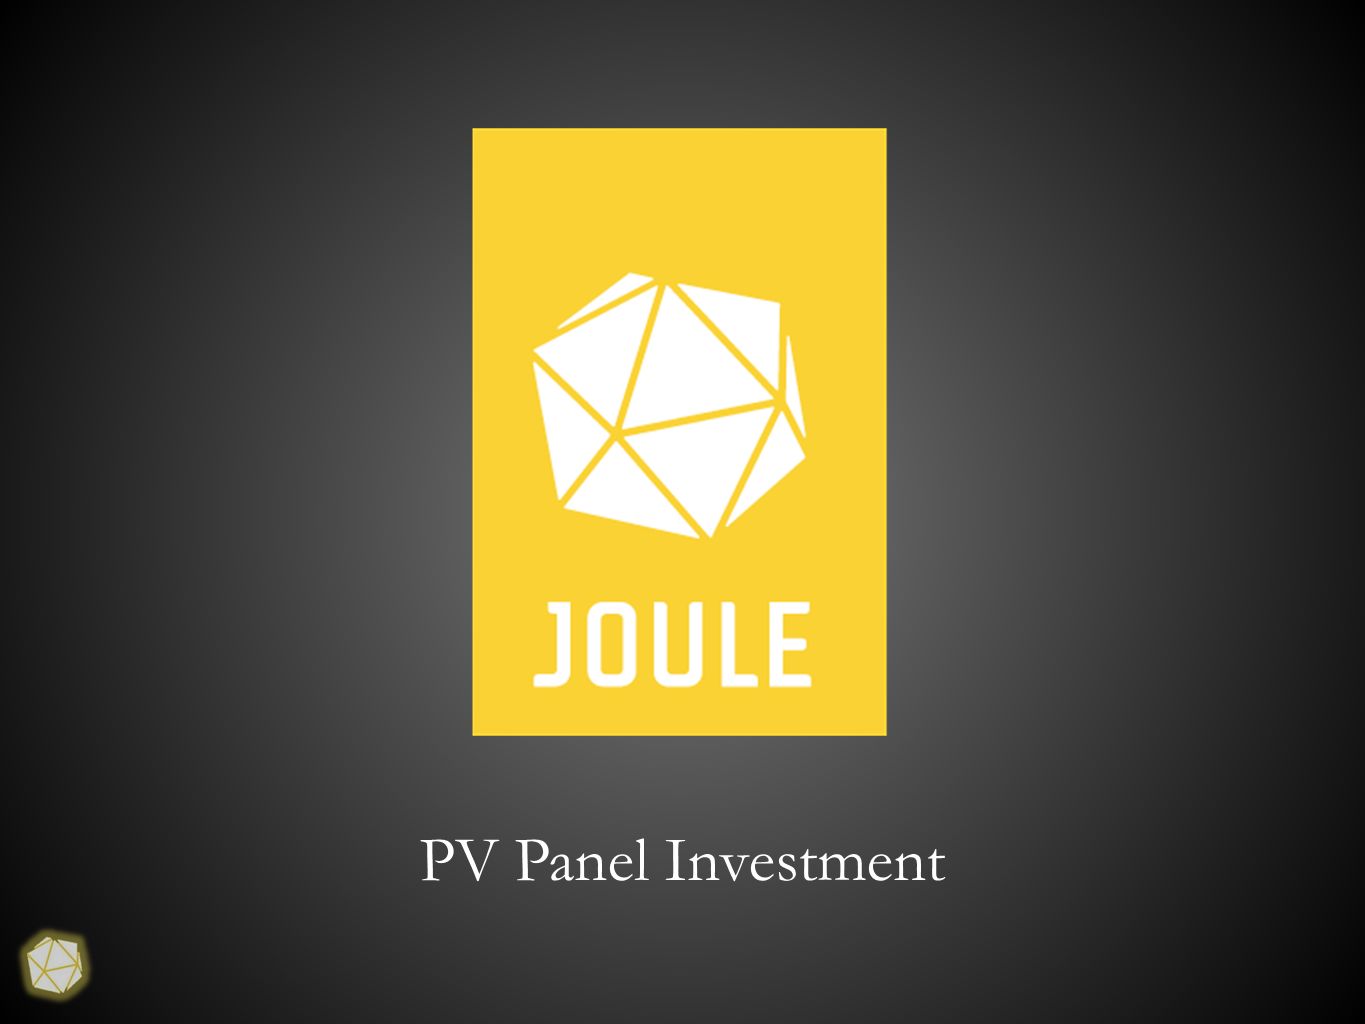 PV Panel Investment